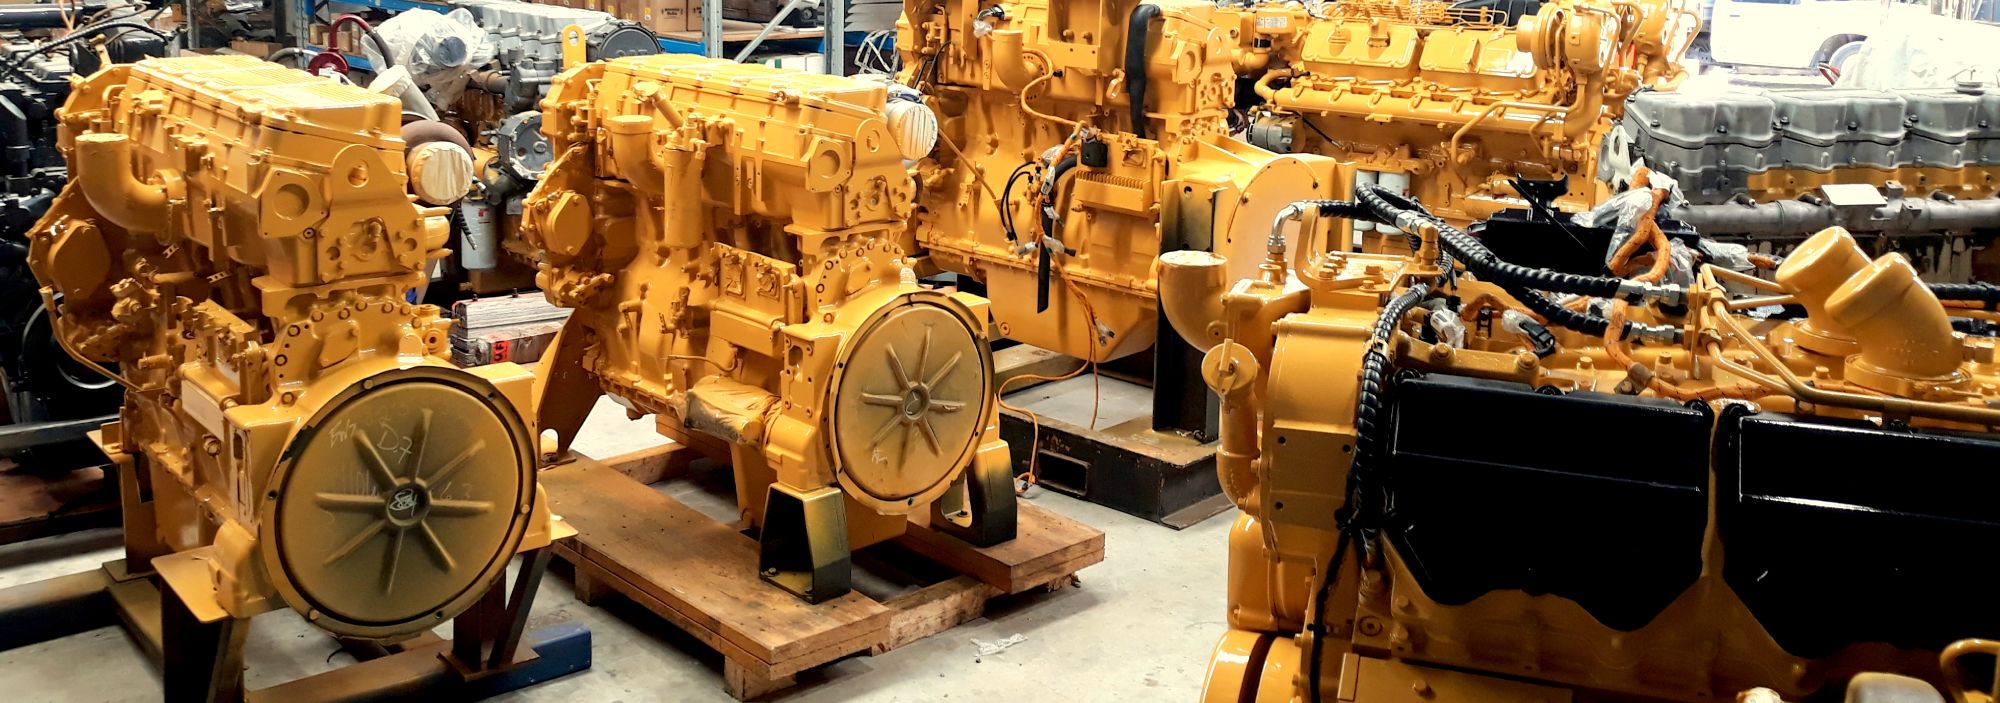 CaterpillarÂ® Used C32 Engine Parts From Second Hand Engines For Sale